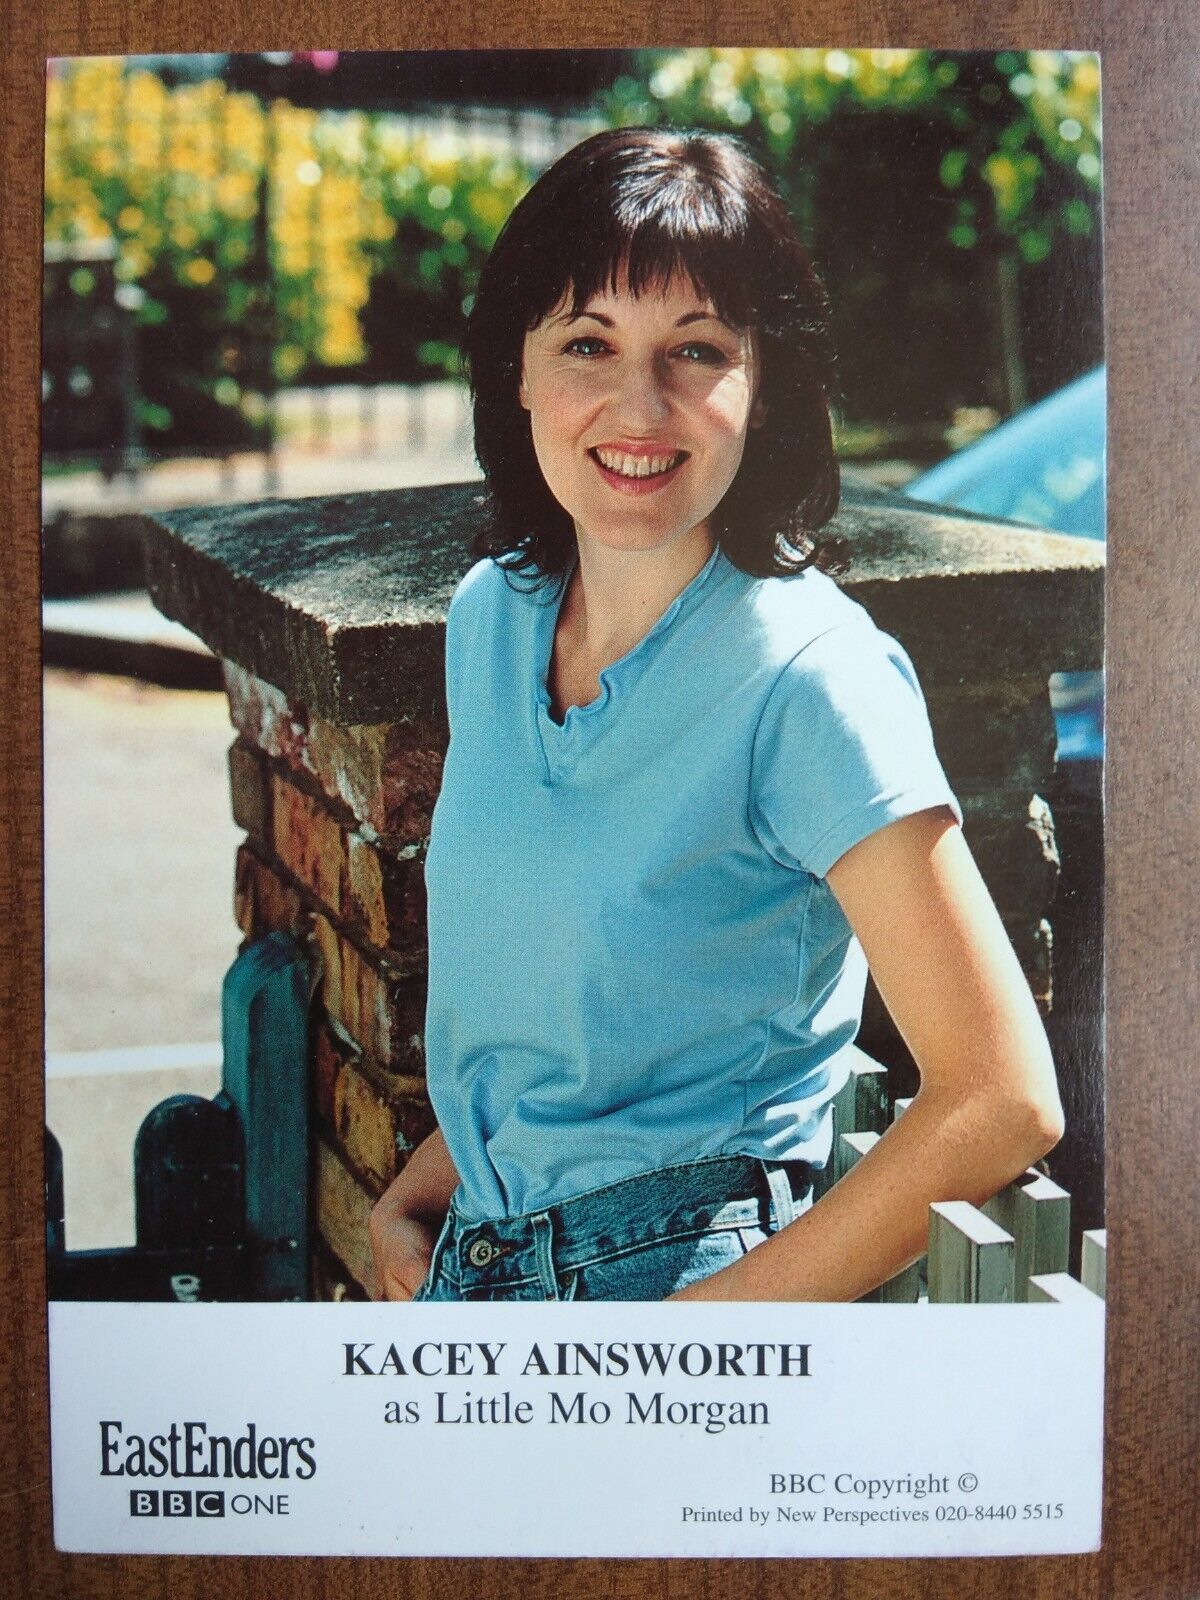 KACEY AINSWORTH *Little Mo Morgan* EASTENDERS NOT SIGNED FAN CAST PHOTO CARD